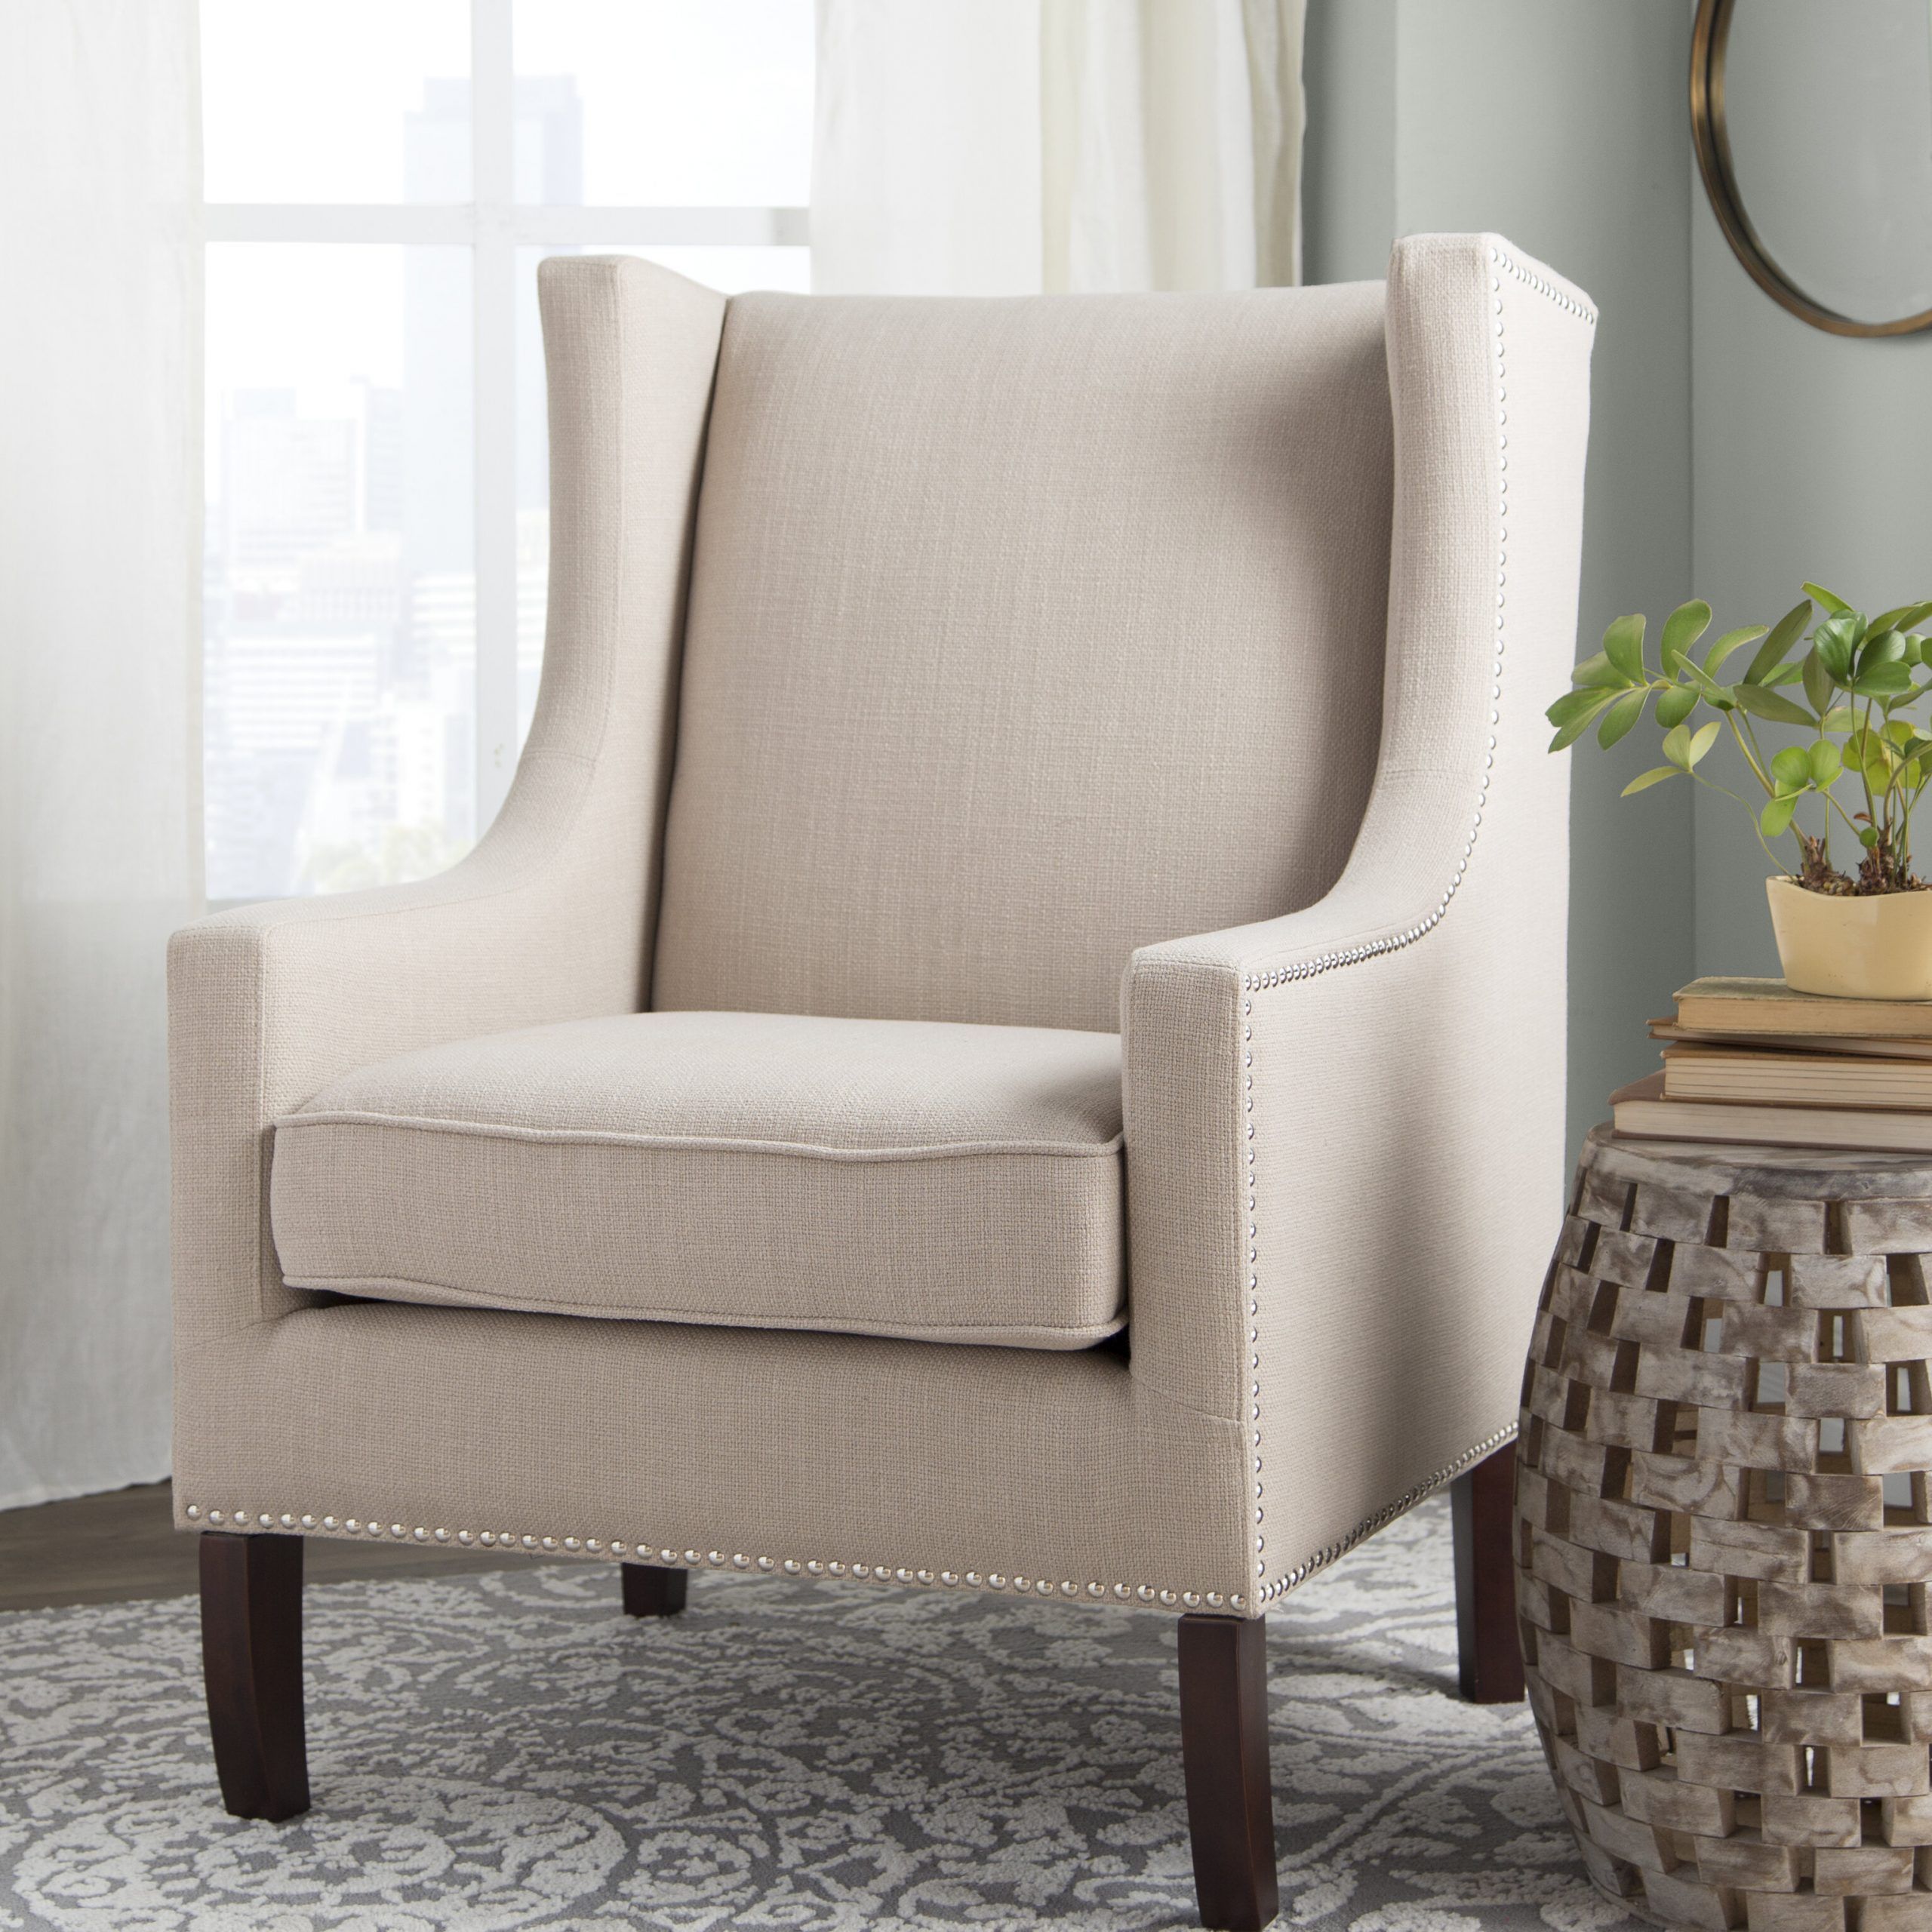 Nailhead Accent Chairs You'Ll Love In 2021 | Wayfair Within Suki Armchairs By Canora Grey (View 4 of 15)